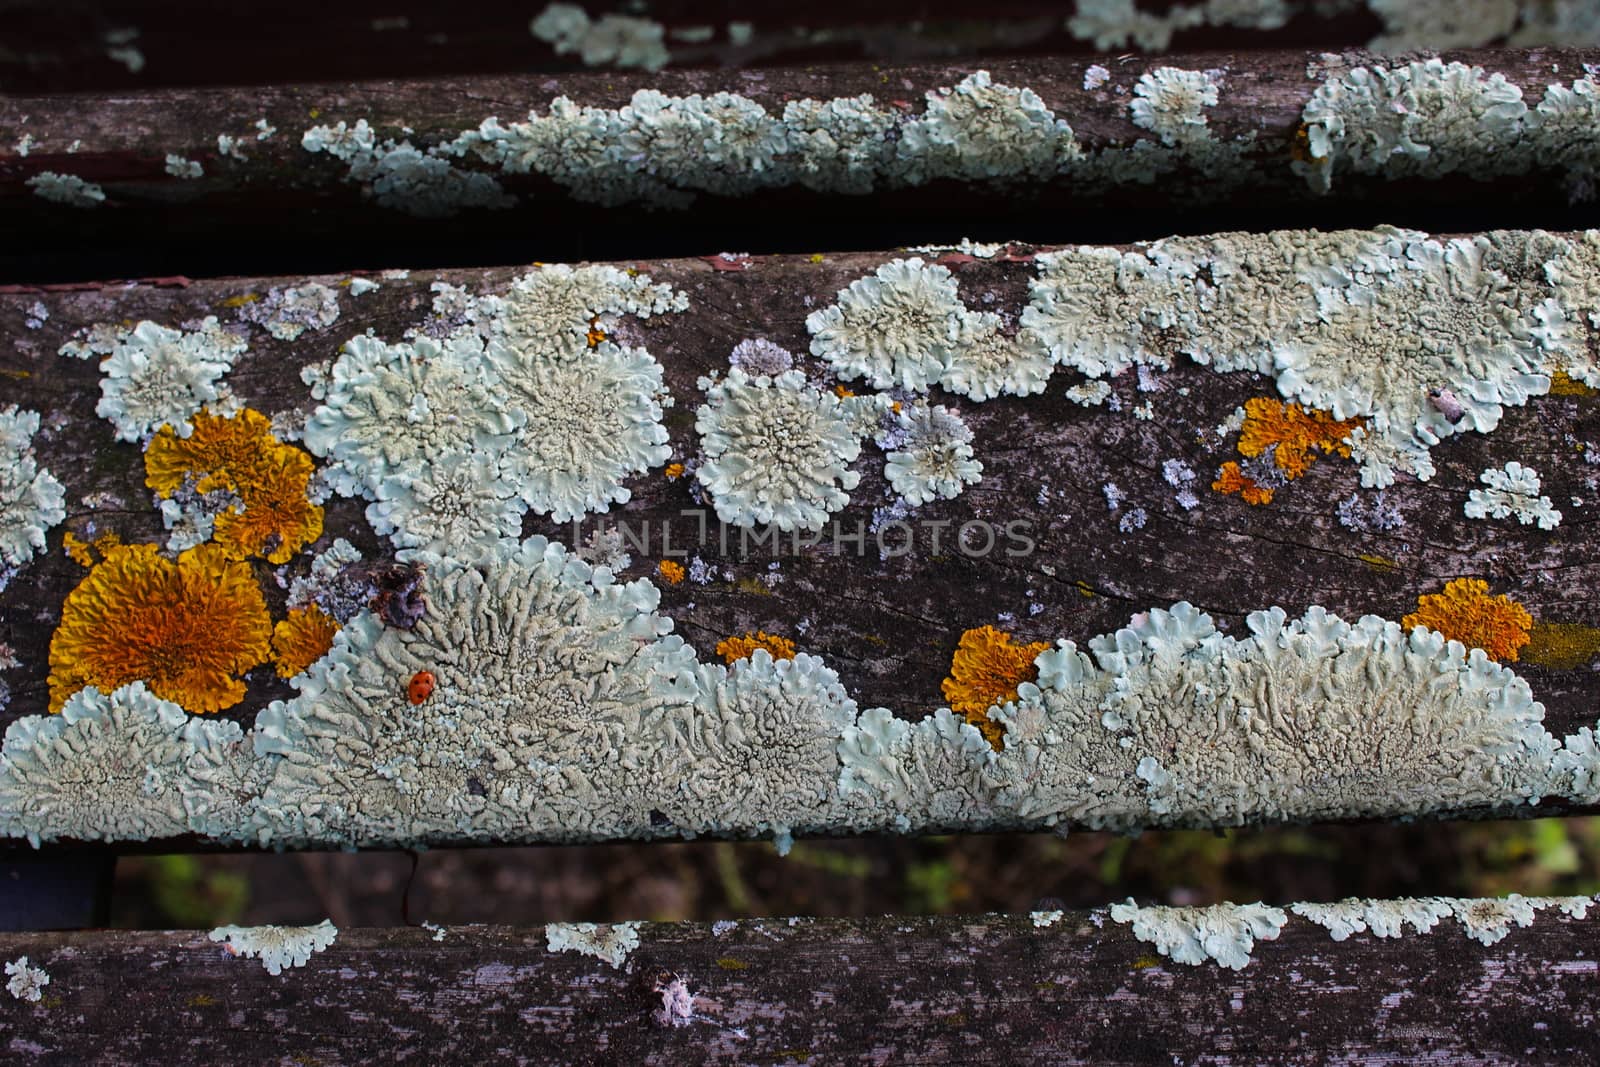 Fungus on the wooden bench. by mahirrov